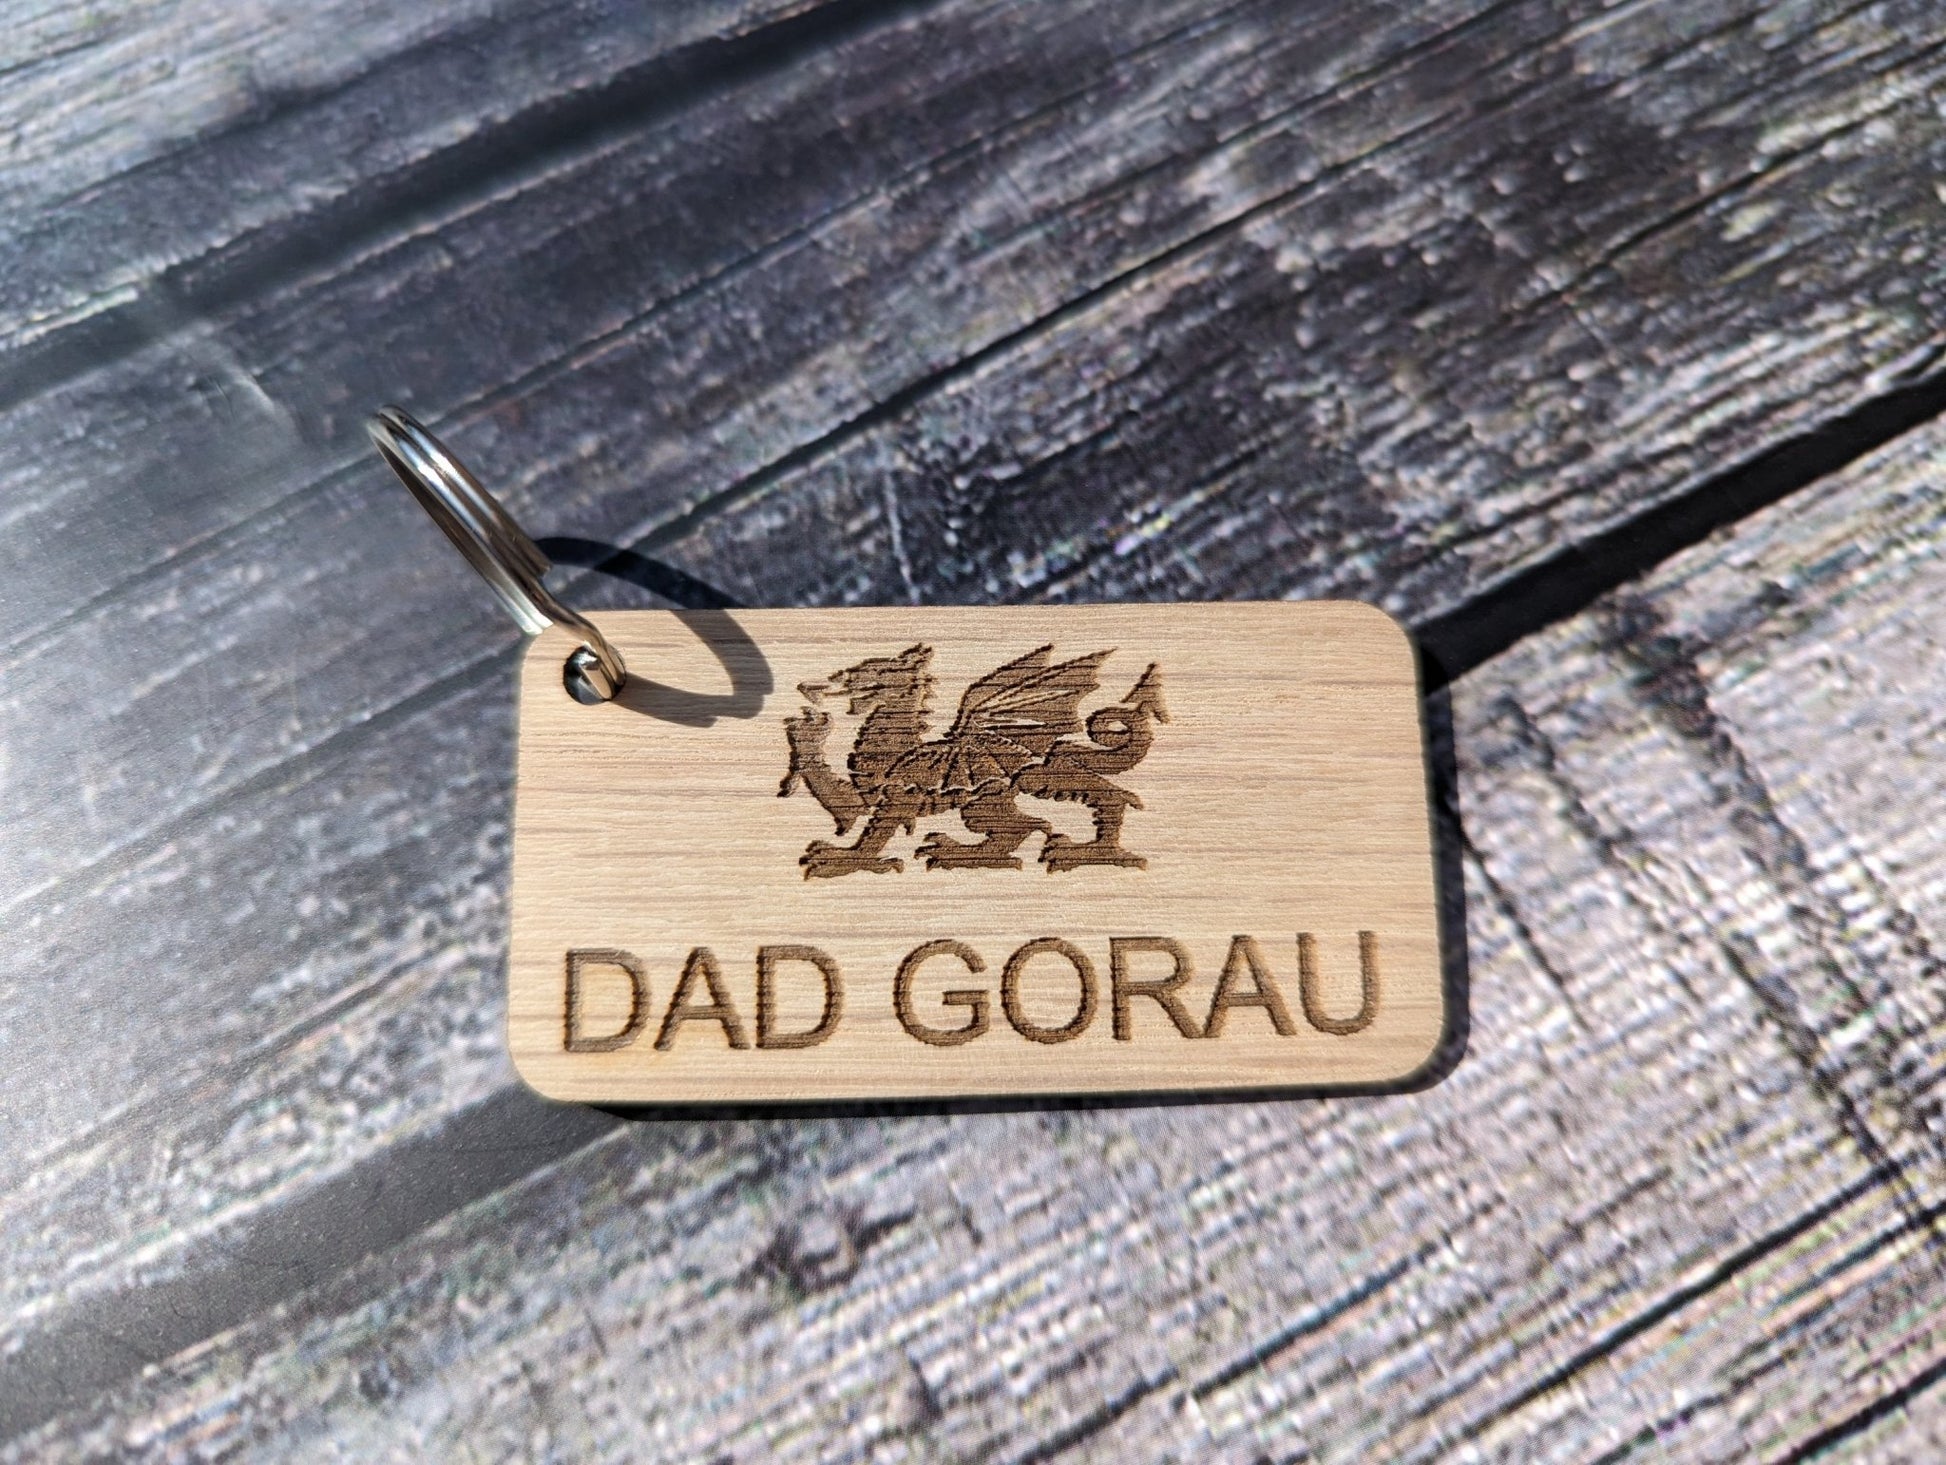 Welsh Keyrings, Best Dad, Best Mam, Dad Gorau, Mam Gorau, with Welsh Dragon, Welsh Gifts, Mother&#39;s Day Gift, Father&#39;s Day Gift - CherryGroveCraft